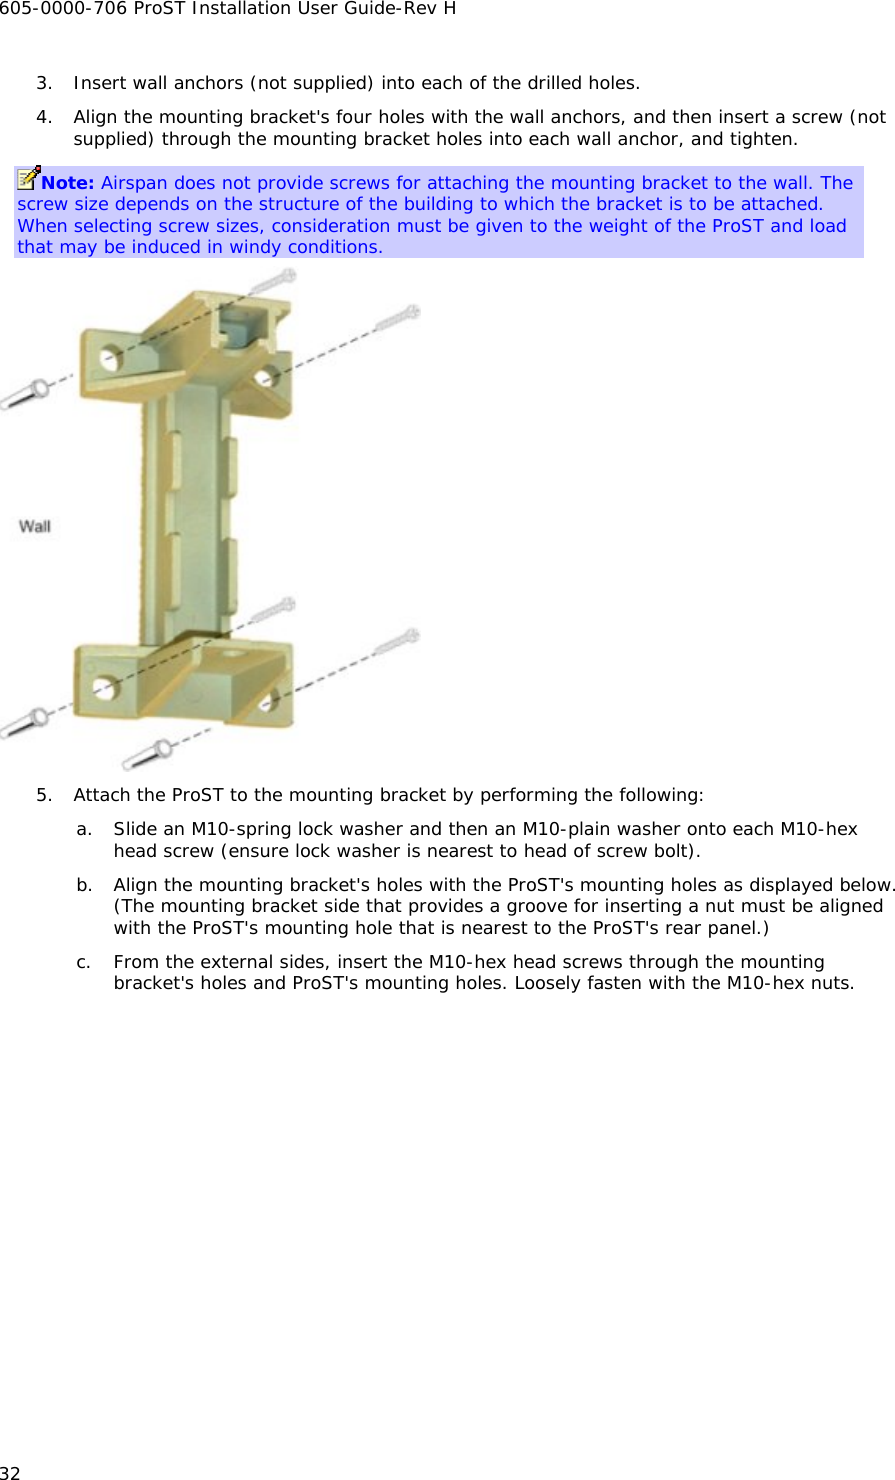 605-0000-706 ProST Installation User Guide-Rev H 32 3. Insert wall anchors (not supplied) into each of the drilled holes. 4. Align the mounting bracket&apos;s four holes with the wall anchors, and then insert a screw (not supplied) through the mounting bracket holes into each wall anchor, and tighten. Note: Airspan does not provide screws for attaching the mounting bracket to the wall. The screw size depends on the structure of the building to which the bracket is to be attached. When selecting screw sizes, consideration must be given to the weight of the ProST and load that may be induced in windy conditions.  5. Attach the ProST to the mounting bracket by performing the following: a. Slide an M10-spring lock washer and then an M10-plain washer onto each M10-hex head screw (ensure lock washer is nearest to head of screw bolt). b. Align the mounting bracket&apos;s holes with the ProST&apos;s mounting holes as displayed below. (The mounting bracket side that provides a groove for inserting a nut must be aligned with the ProST&apos;s mounting hole that is nearest to the ProST&apos;s rear panel.) c. From the external sides, insert the M10-hex head screws through the mounting bracket&apos;s holes and ProST&apos;s mounting holes. Loosely fasten with the M10-hex nuts. 